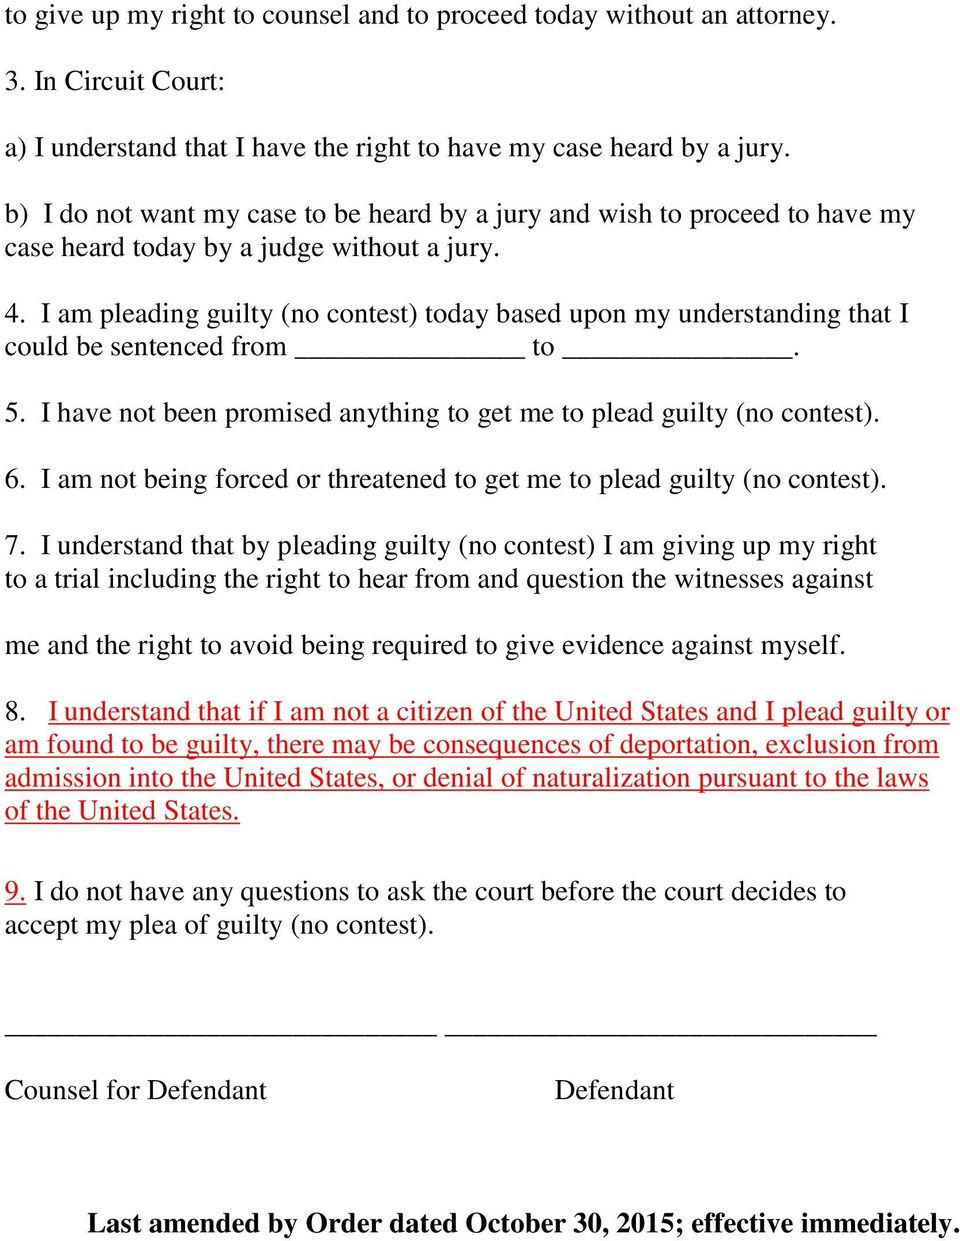 I am pleading guilty (no contest) today based upon my understanding that I could be sentenced from to. 5. I have not been promised anything to get me to plead guilty (no contest). 6.